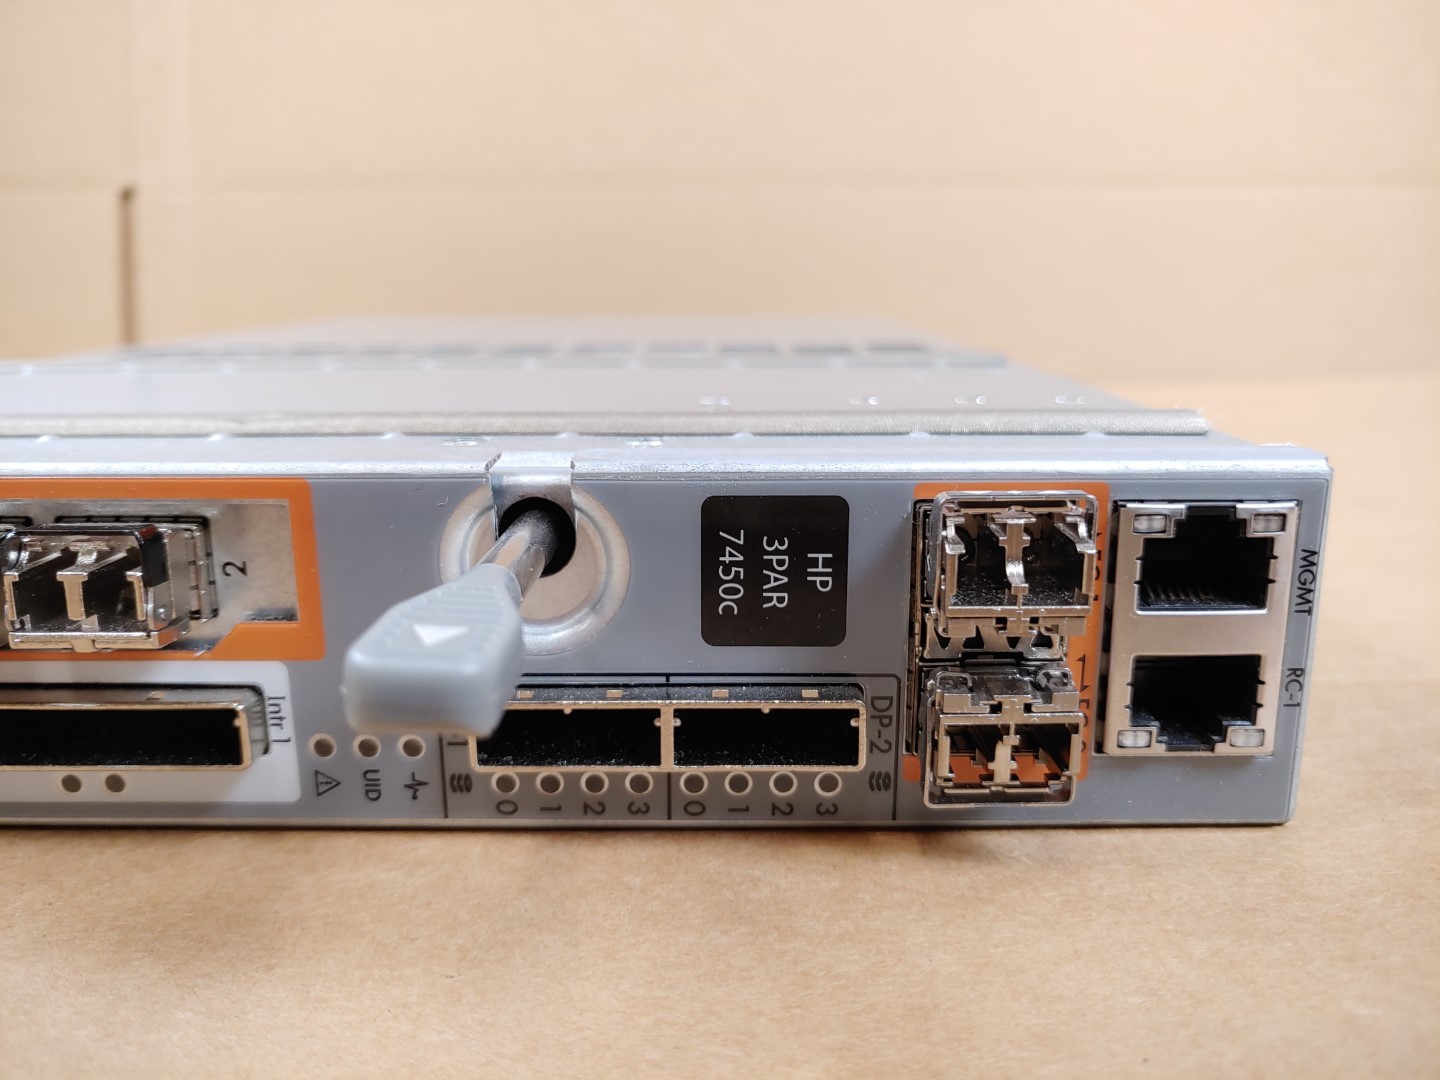 Excellent Condition! Tested and Pulled from a working environment! Item Specifics: MPN : E7X87-63001UPC : N/AType : Server ControllerBrand : HPModel : E7X87-63001 / 769750-001Product Line : 3PAR - 2